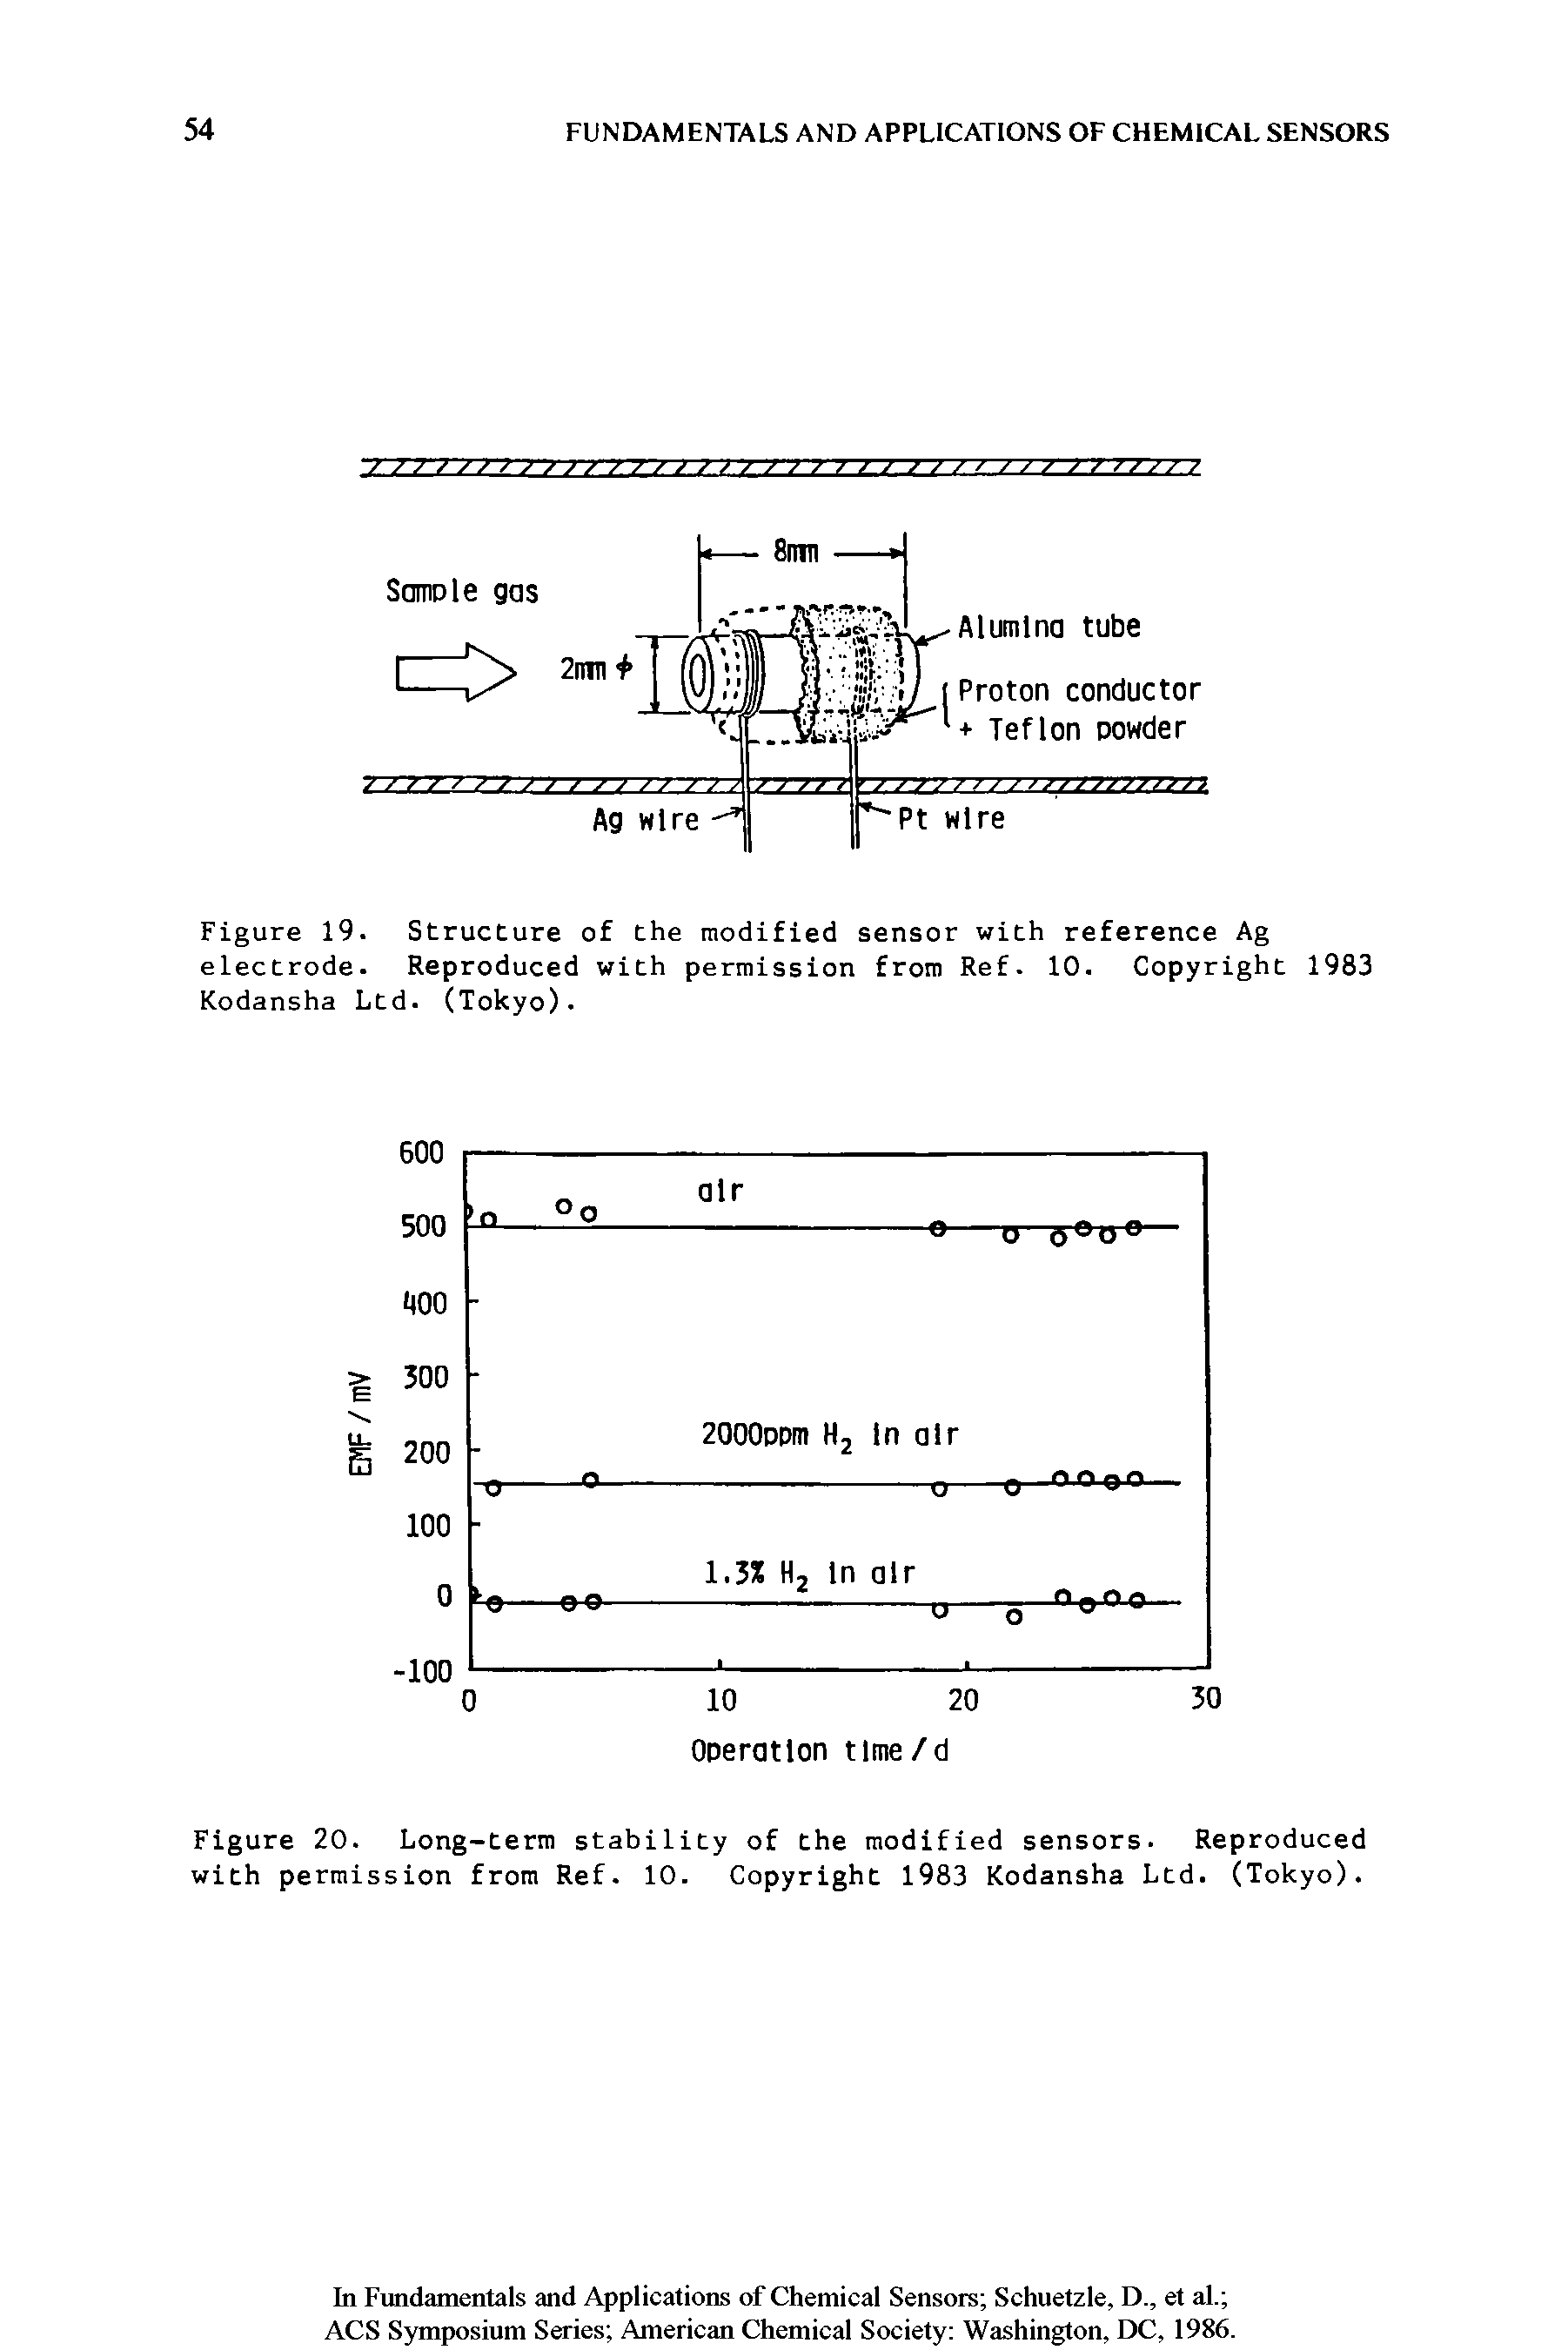 Figure 19. Structure of the modified sensor with reference Ag electrode. Reproduced with permission from Ref. 10. Copyright 1983 Kodansha Ltd. (Tokyo).